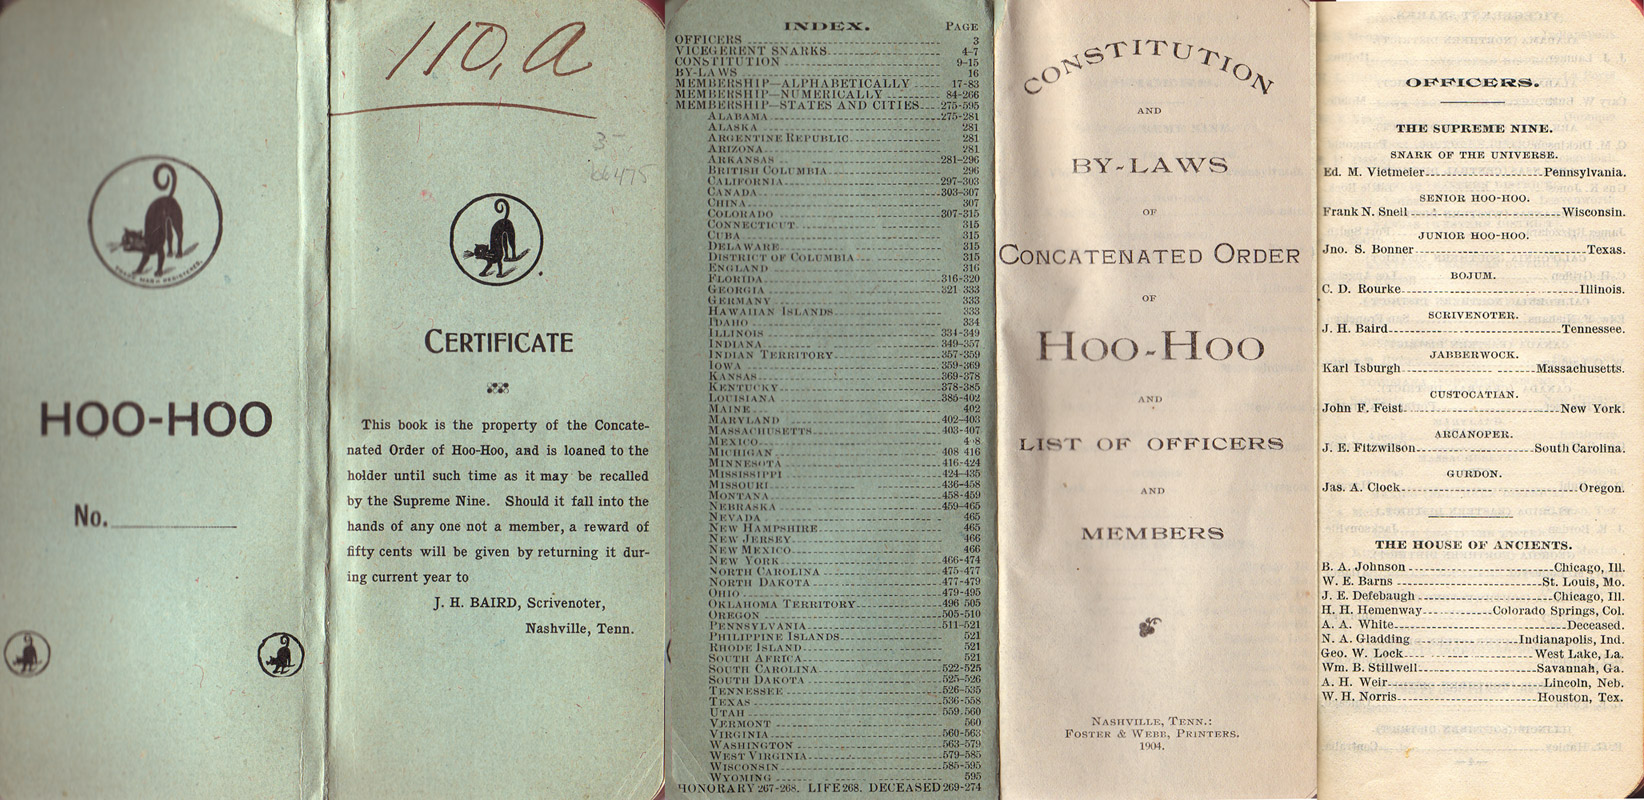 several pages from the "Constitution and By-Laws of Concatenated Order of Hoo-Hoo and List of Officers and Members."